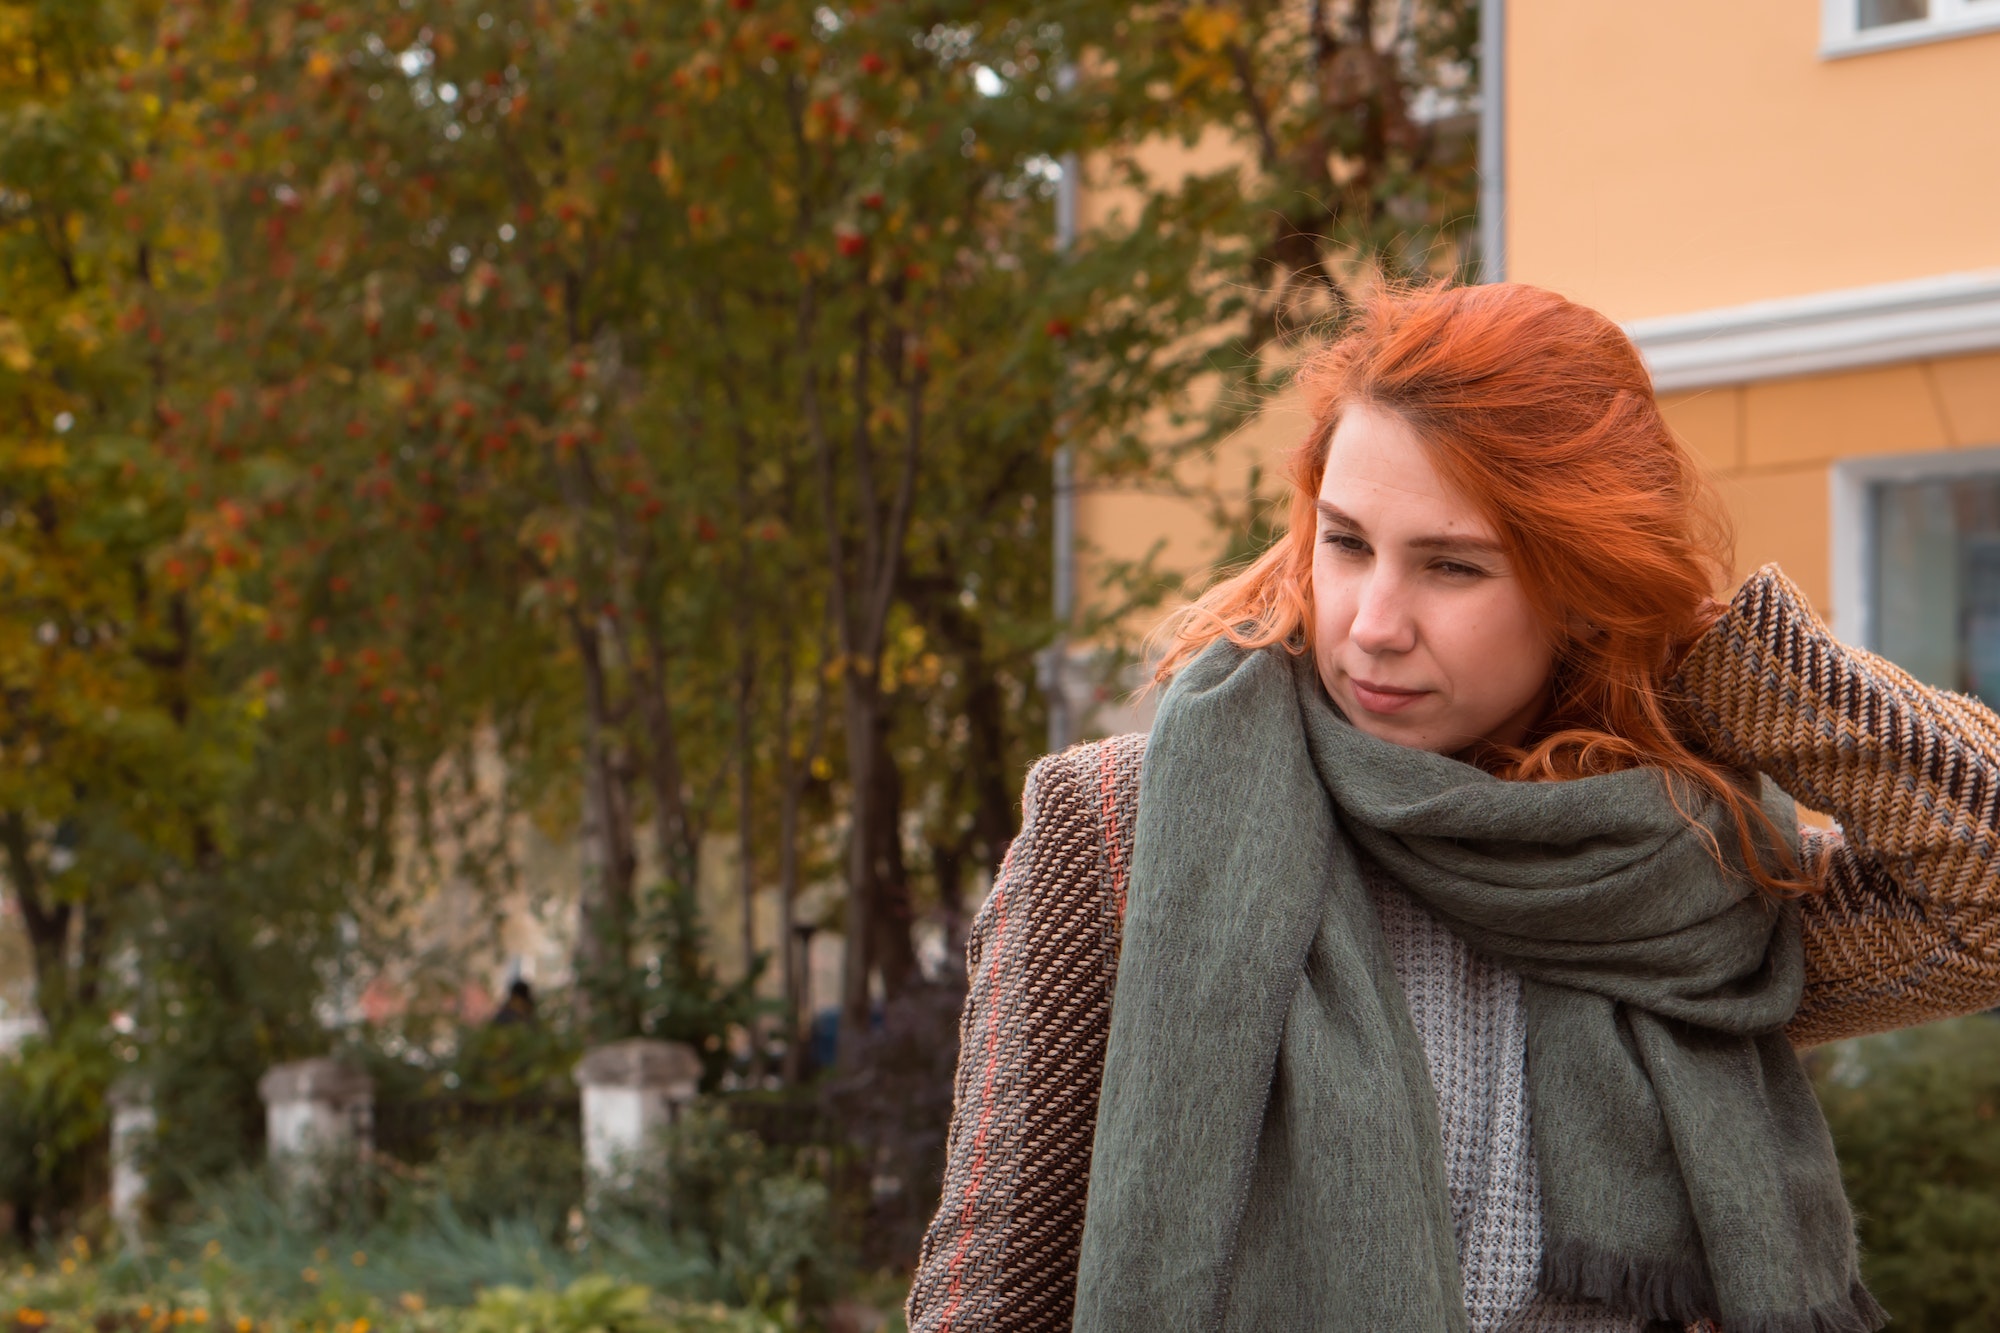 Worry - young woman outdoors in city